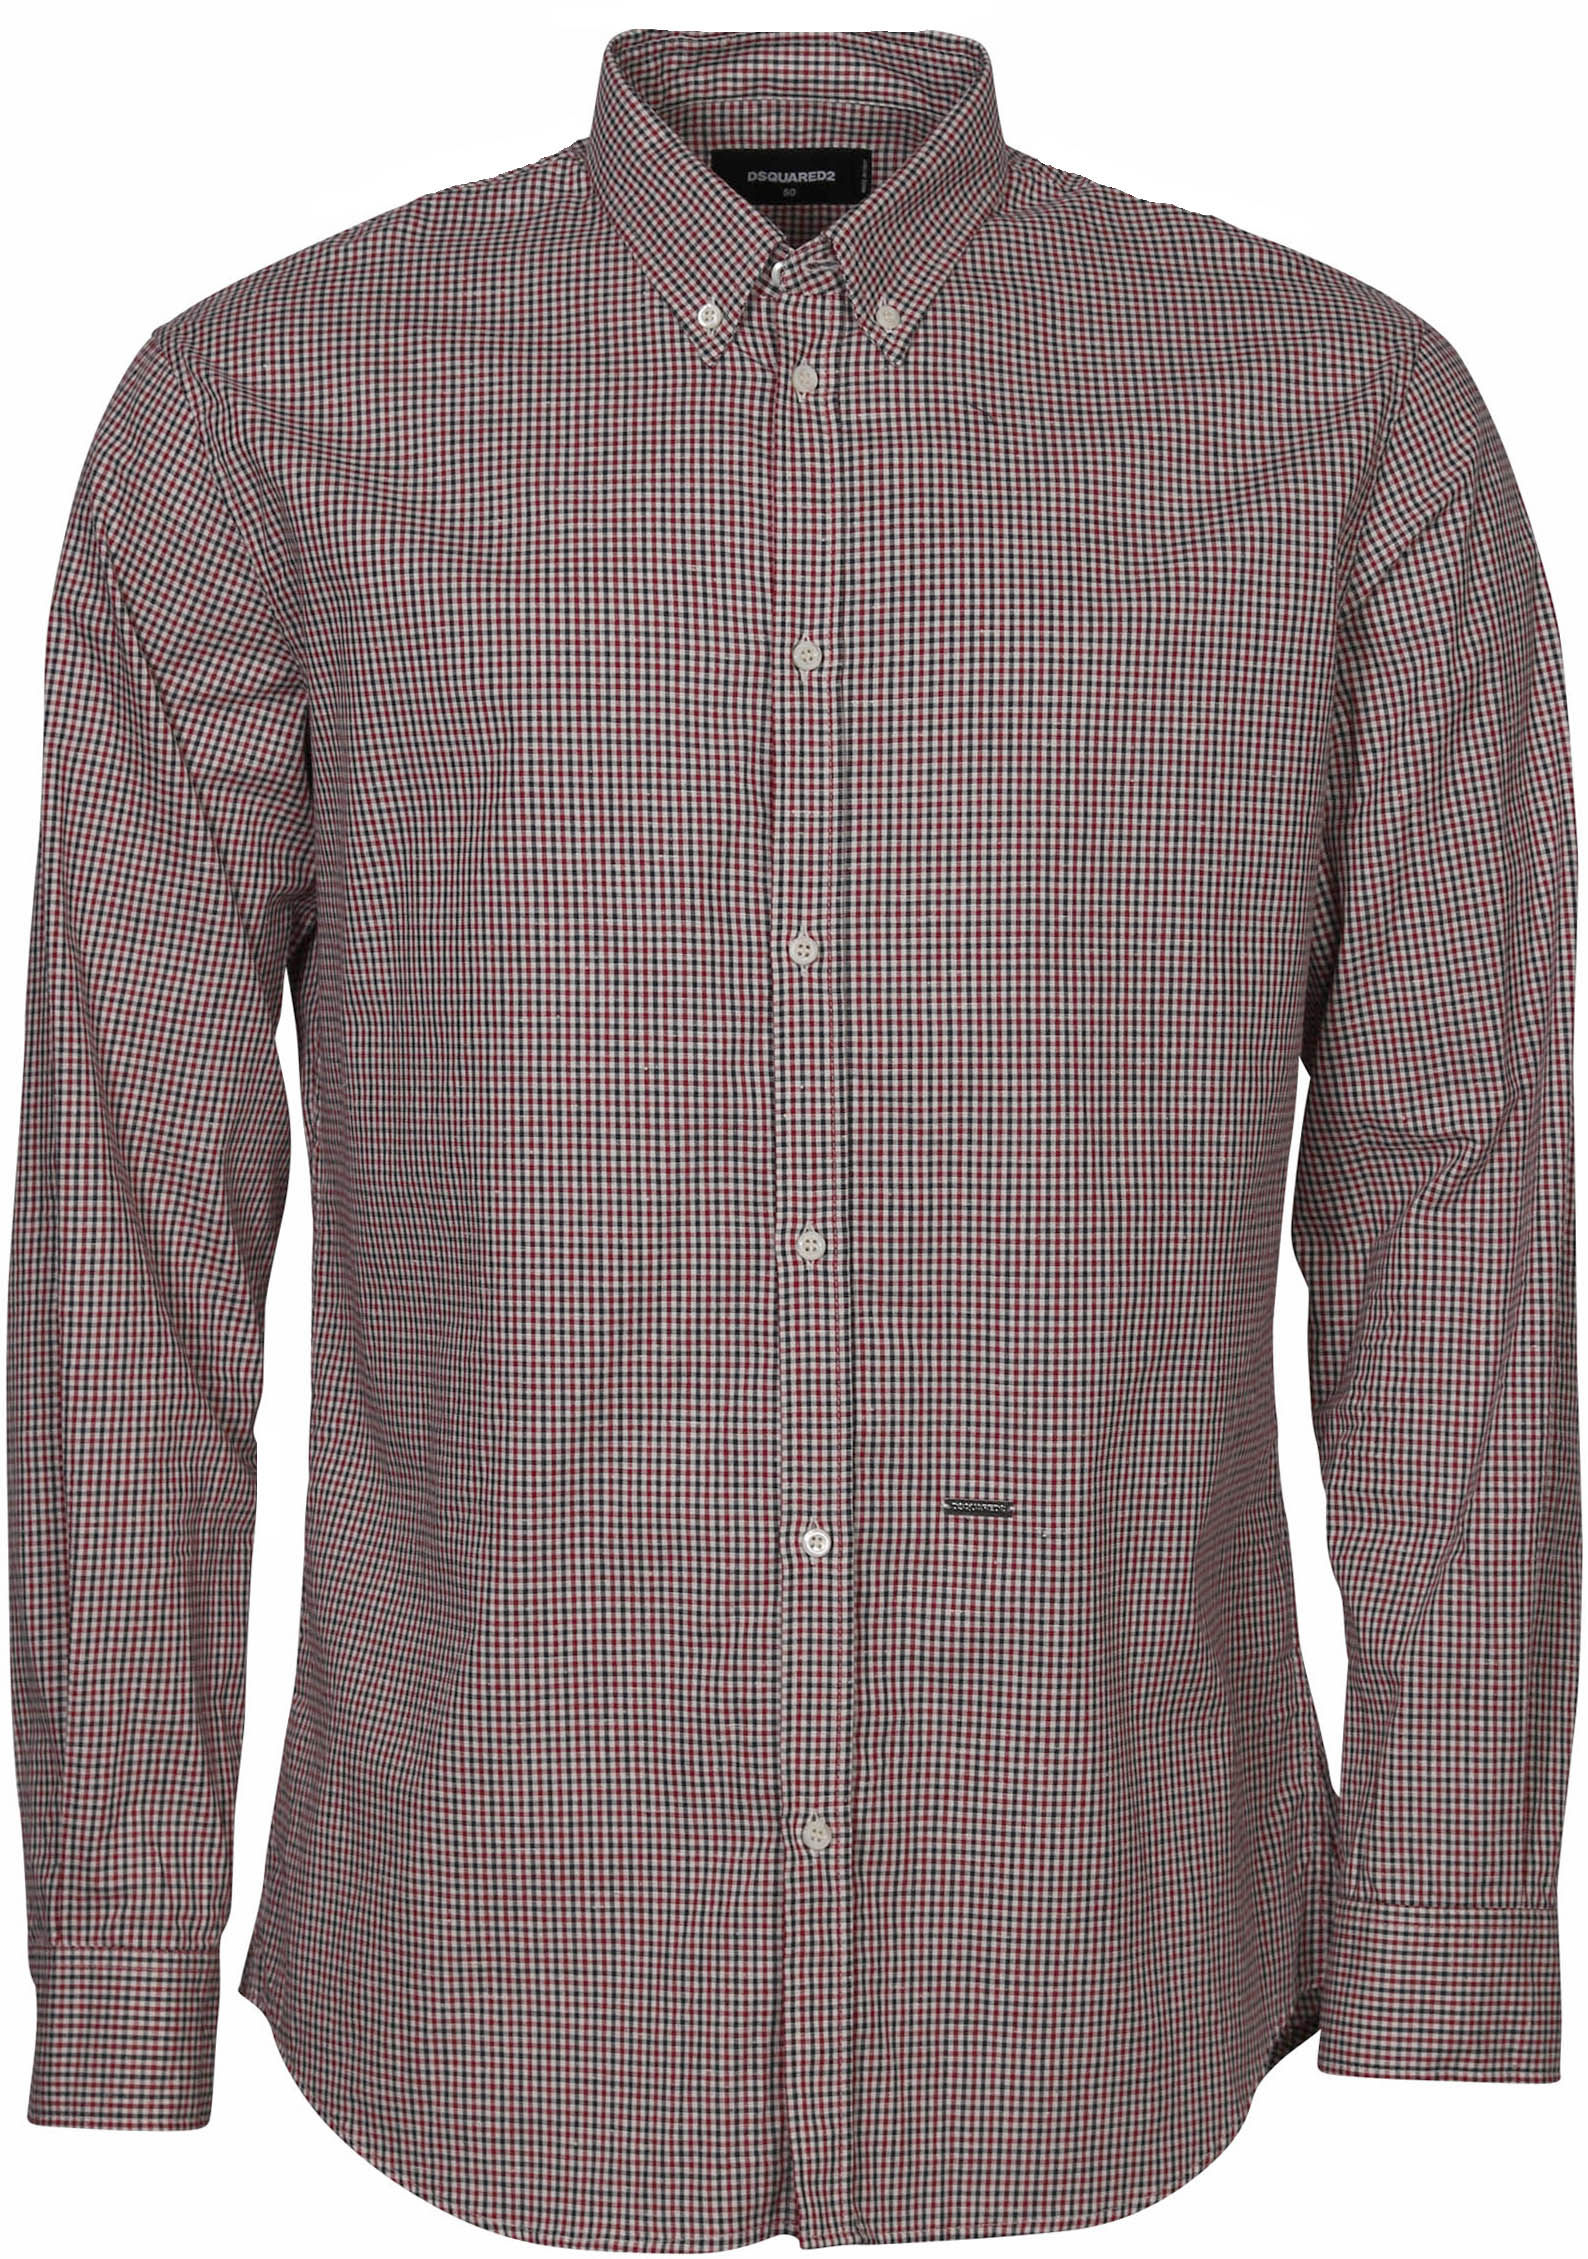 Dsquared Check Shirt Red/Navy/Beige